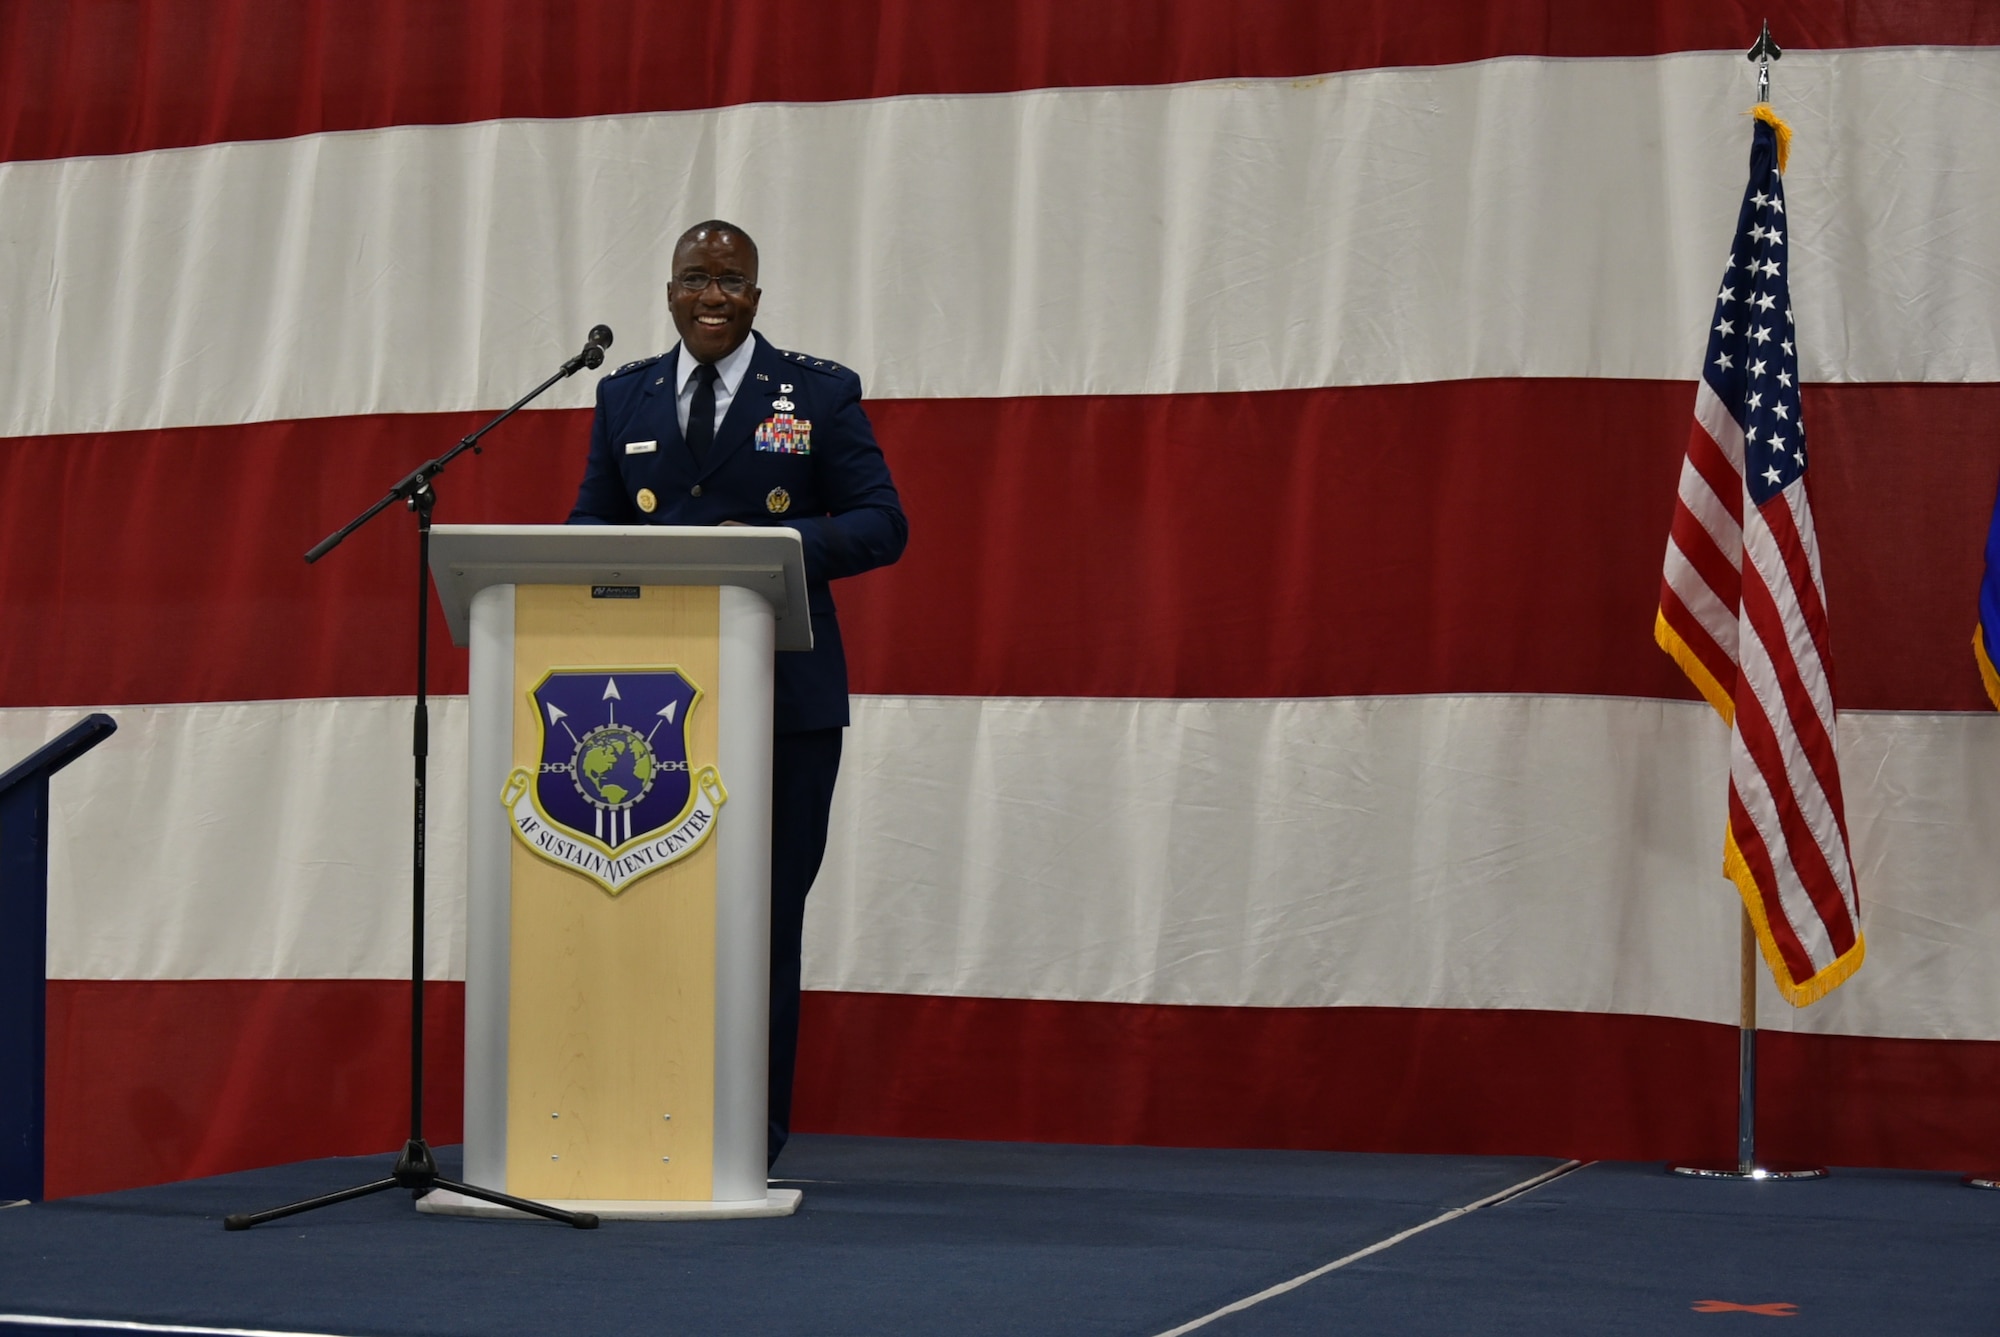 220815-F-UR719-4044
Lt. Gen. Stacey T. Hawkins addresses the crowd after taking command of the Air Force Sustainment Center during a change of command ceremony at Tinker Air Force Base, Oklahoma, Aug. 15, 2022.